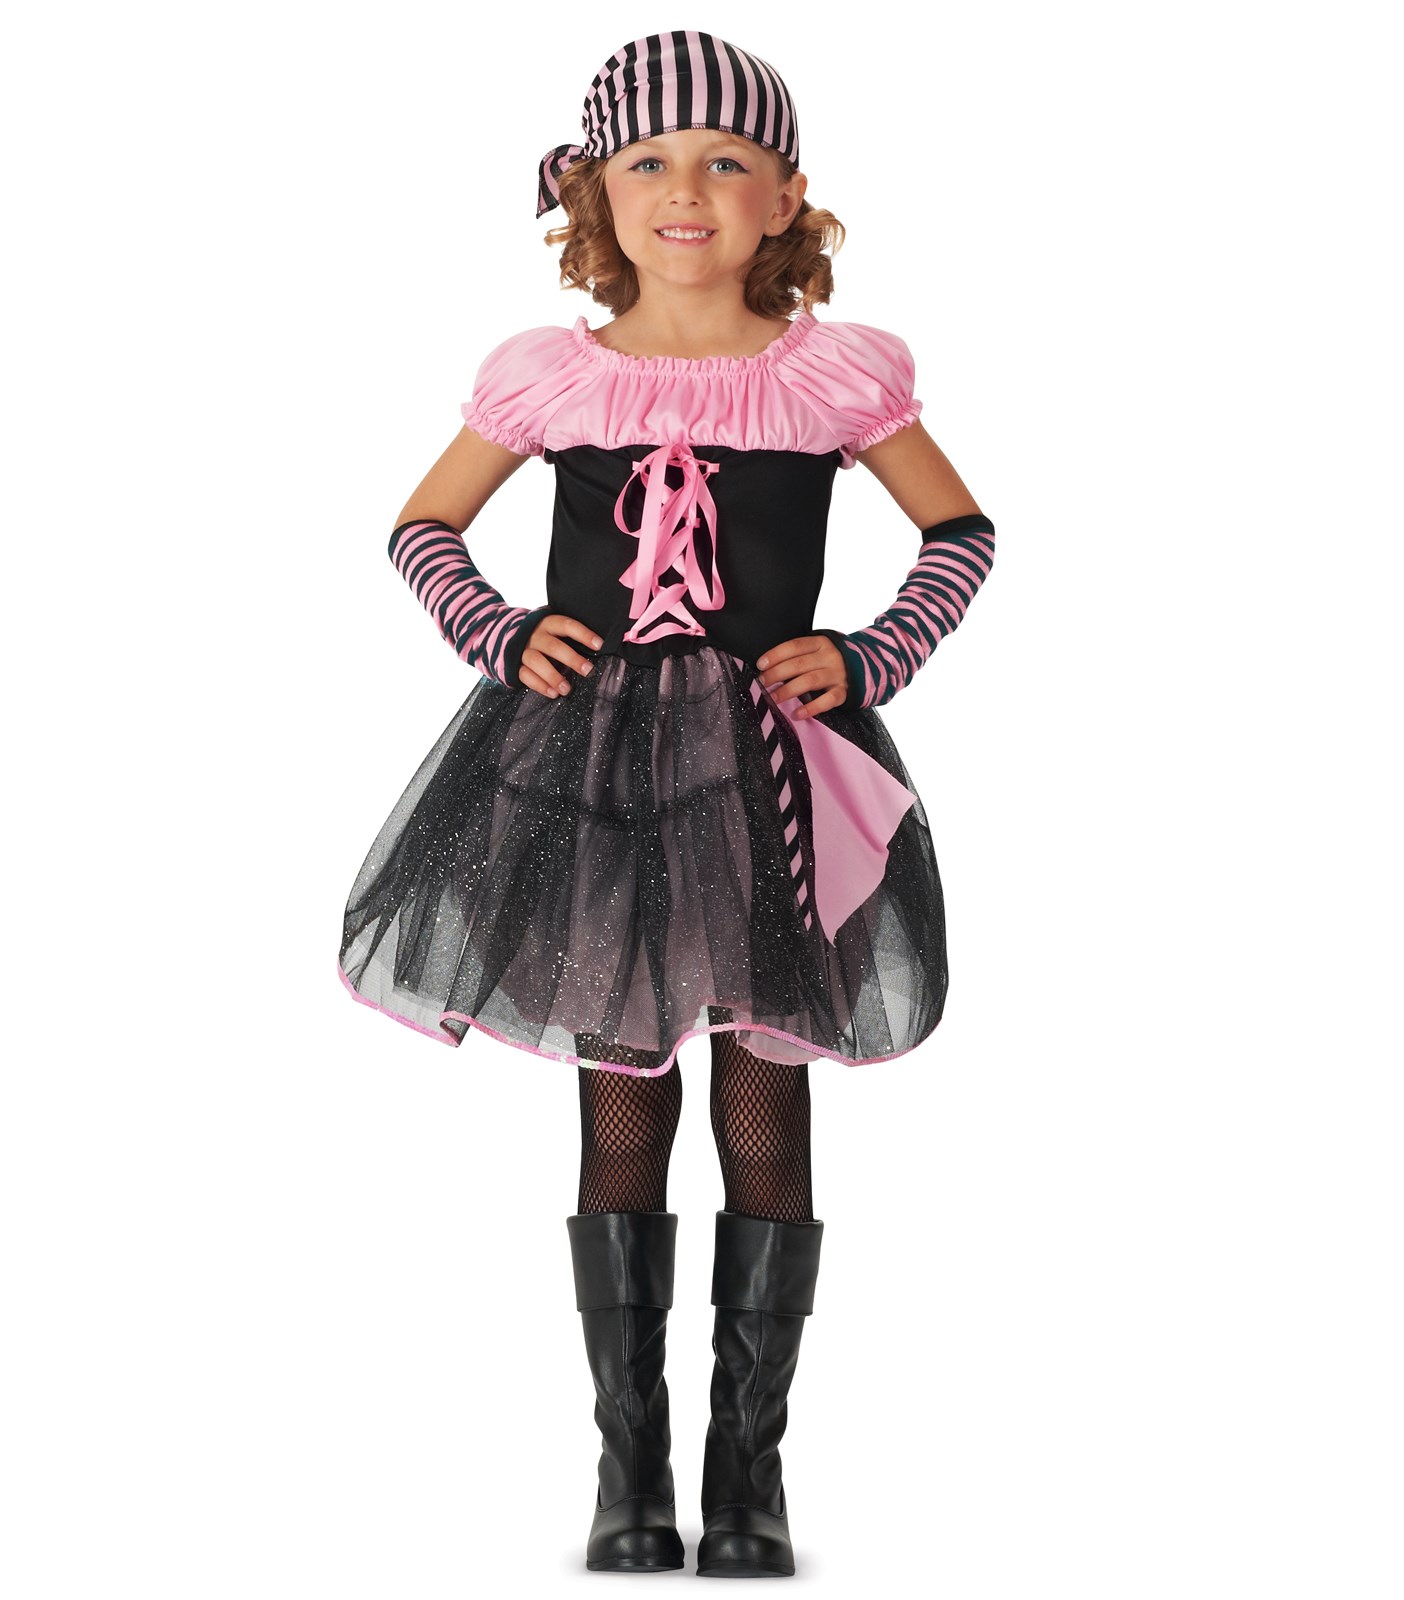 Deluxe Pink Skull Pirate Child Costume